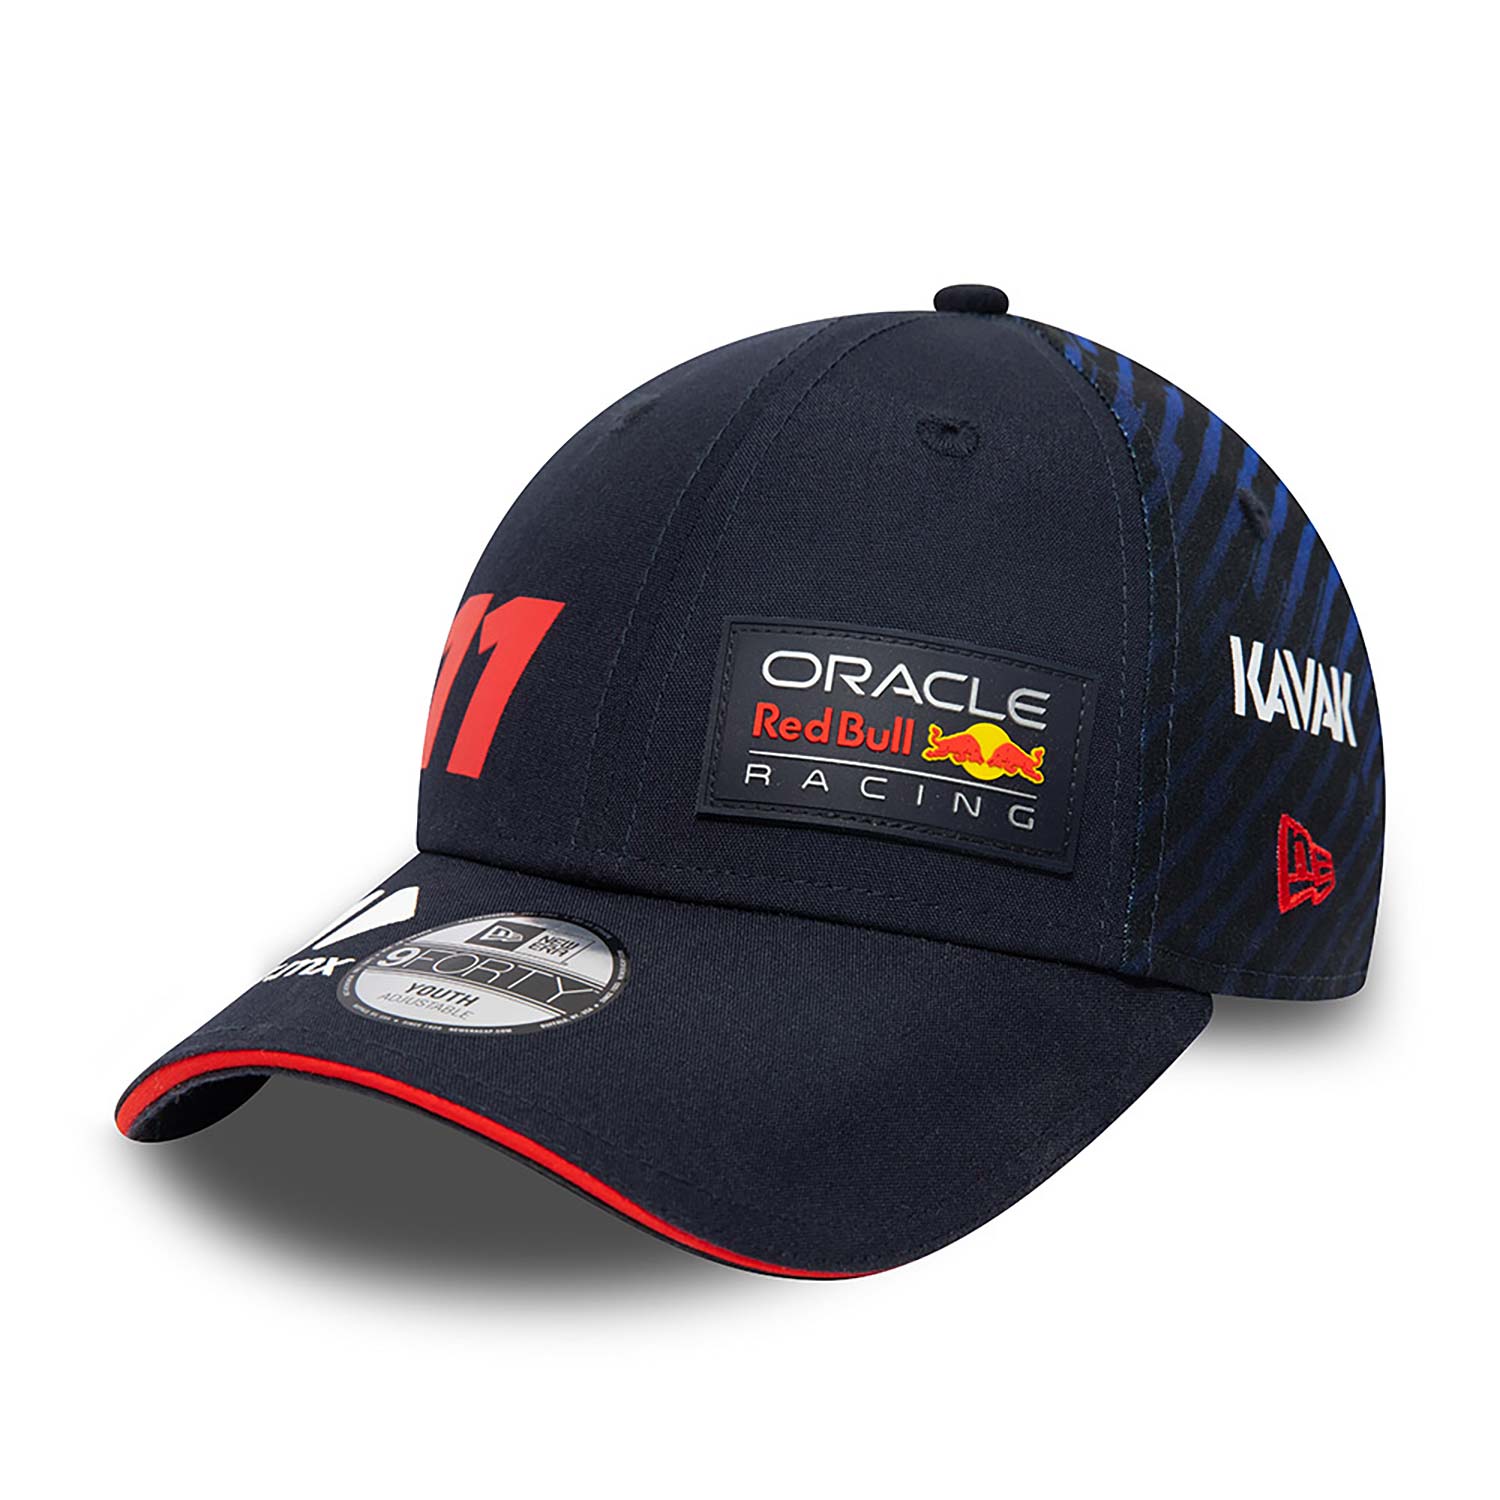 Red Bull Sergio Perez Youth Blue 9FORTY Adjustable Cap